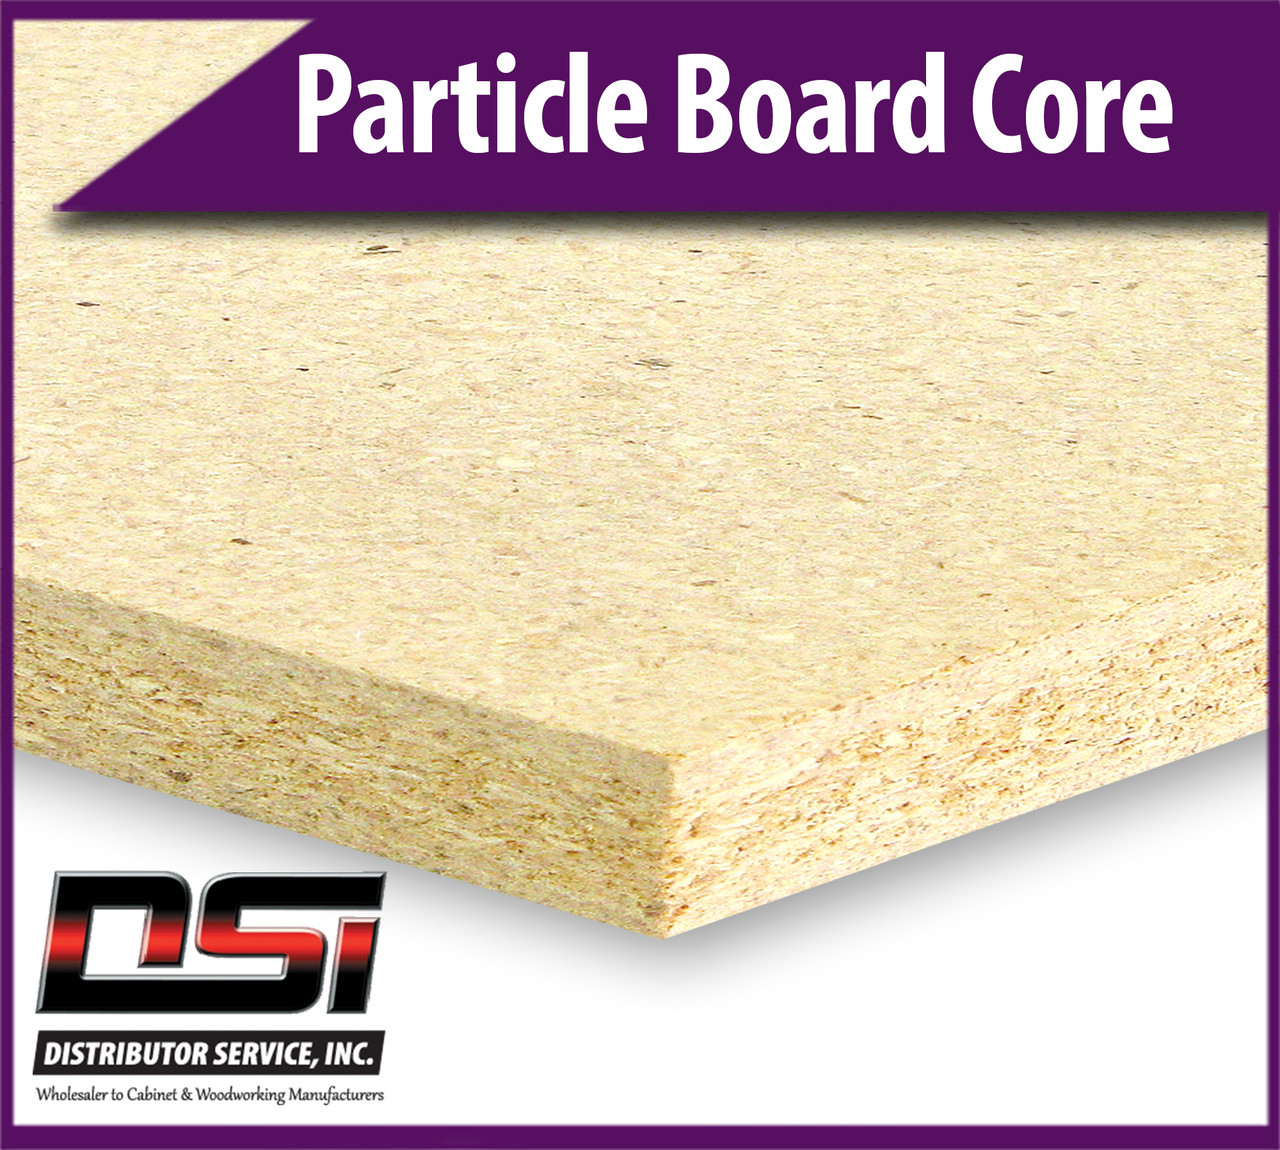 Particle Board Core 1-1/8" x 49" x 97" Industrial Particleboard Panels